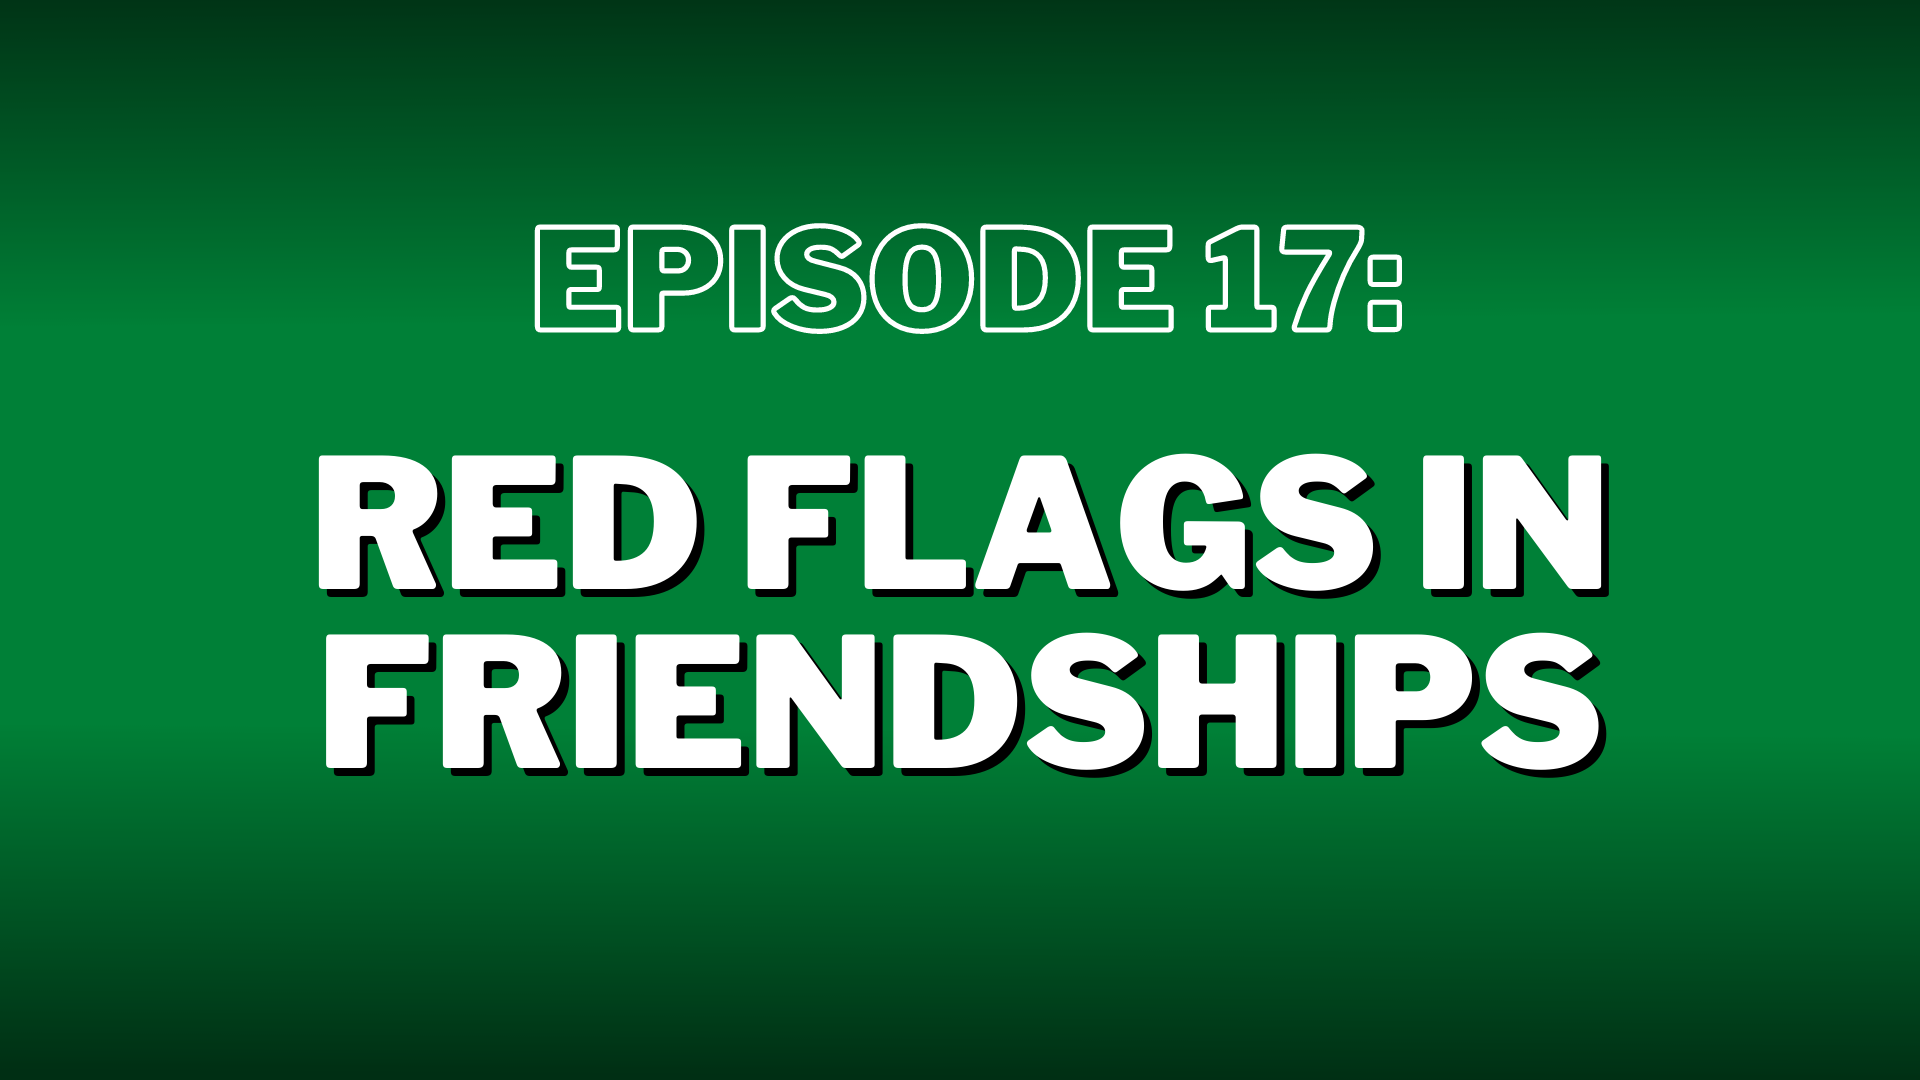 Episode 17. Red Flags in Friendships – Show Notes